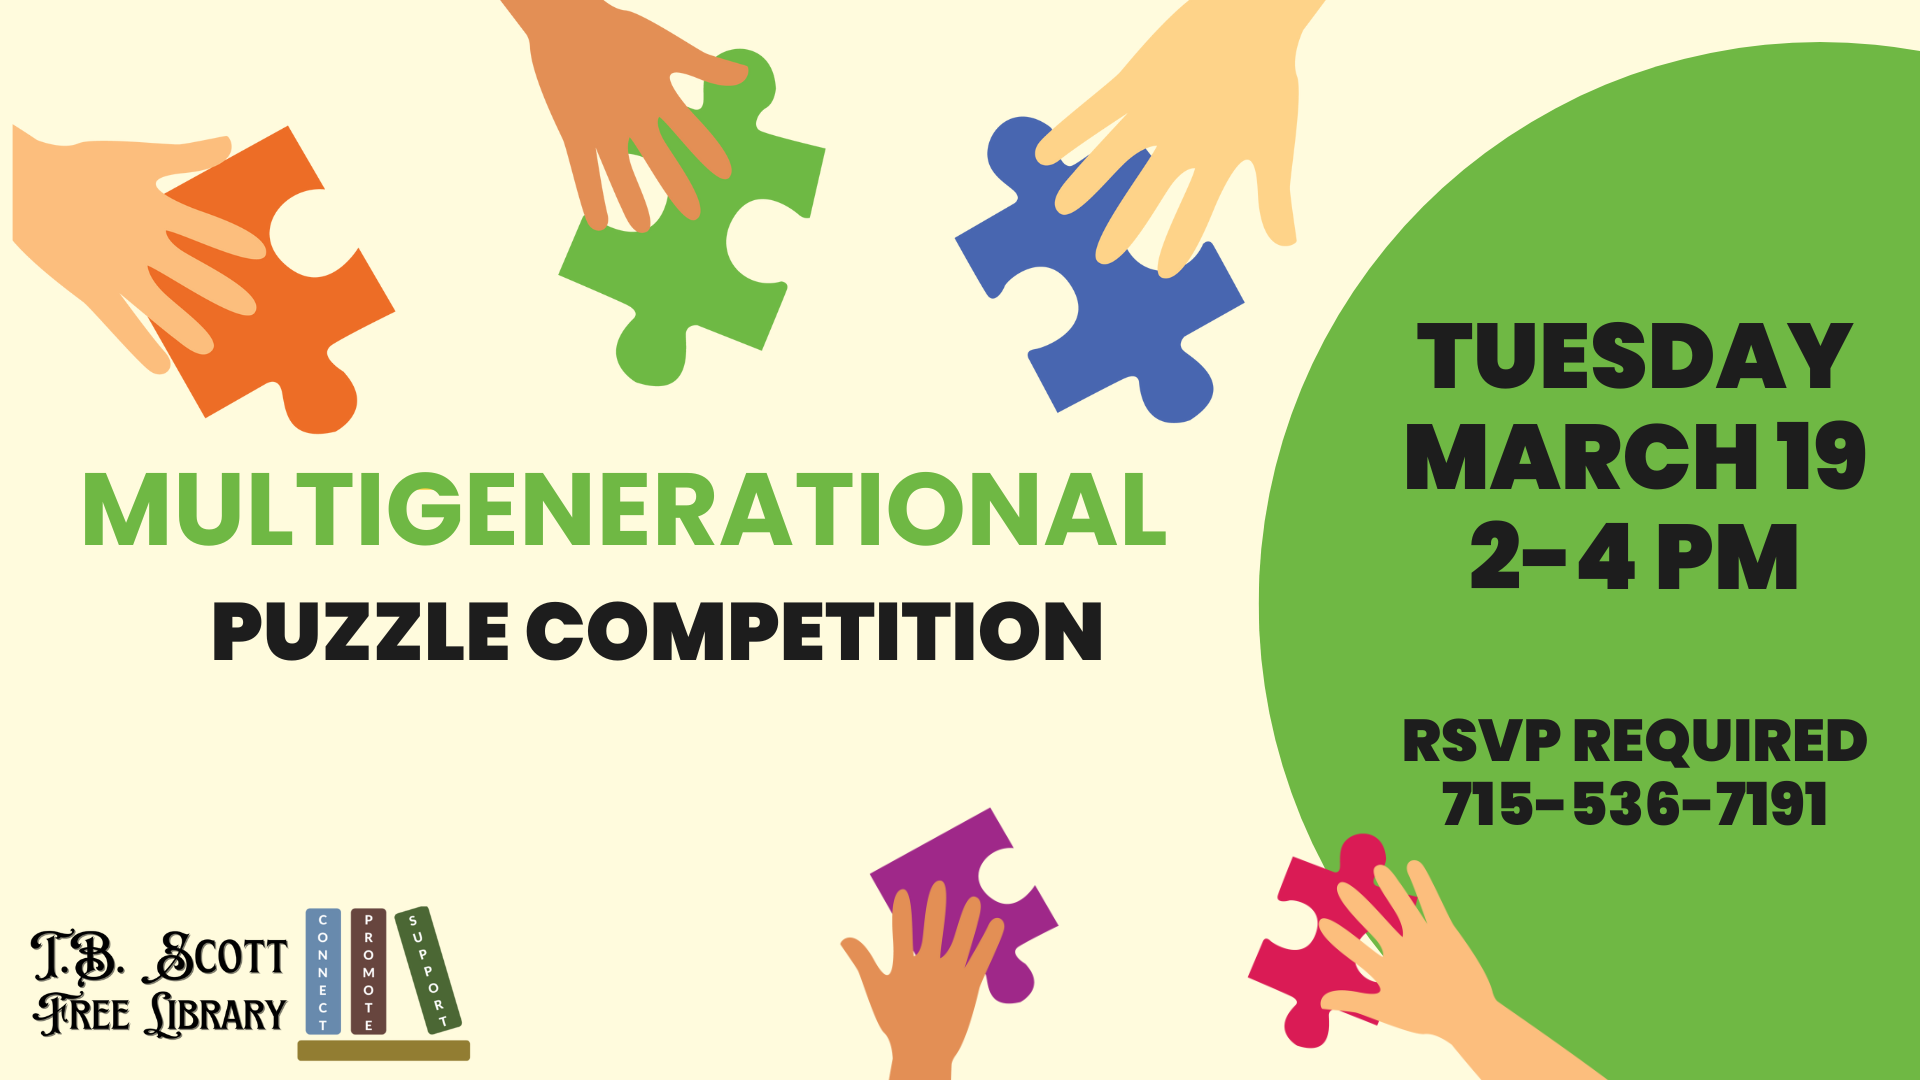 Puzzle competition on March 19: participants solving puzzles at tables in a brightly lit room. Call 715-536-7191 to register.